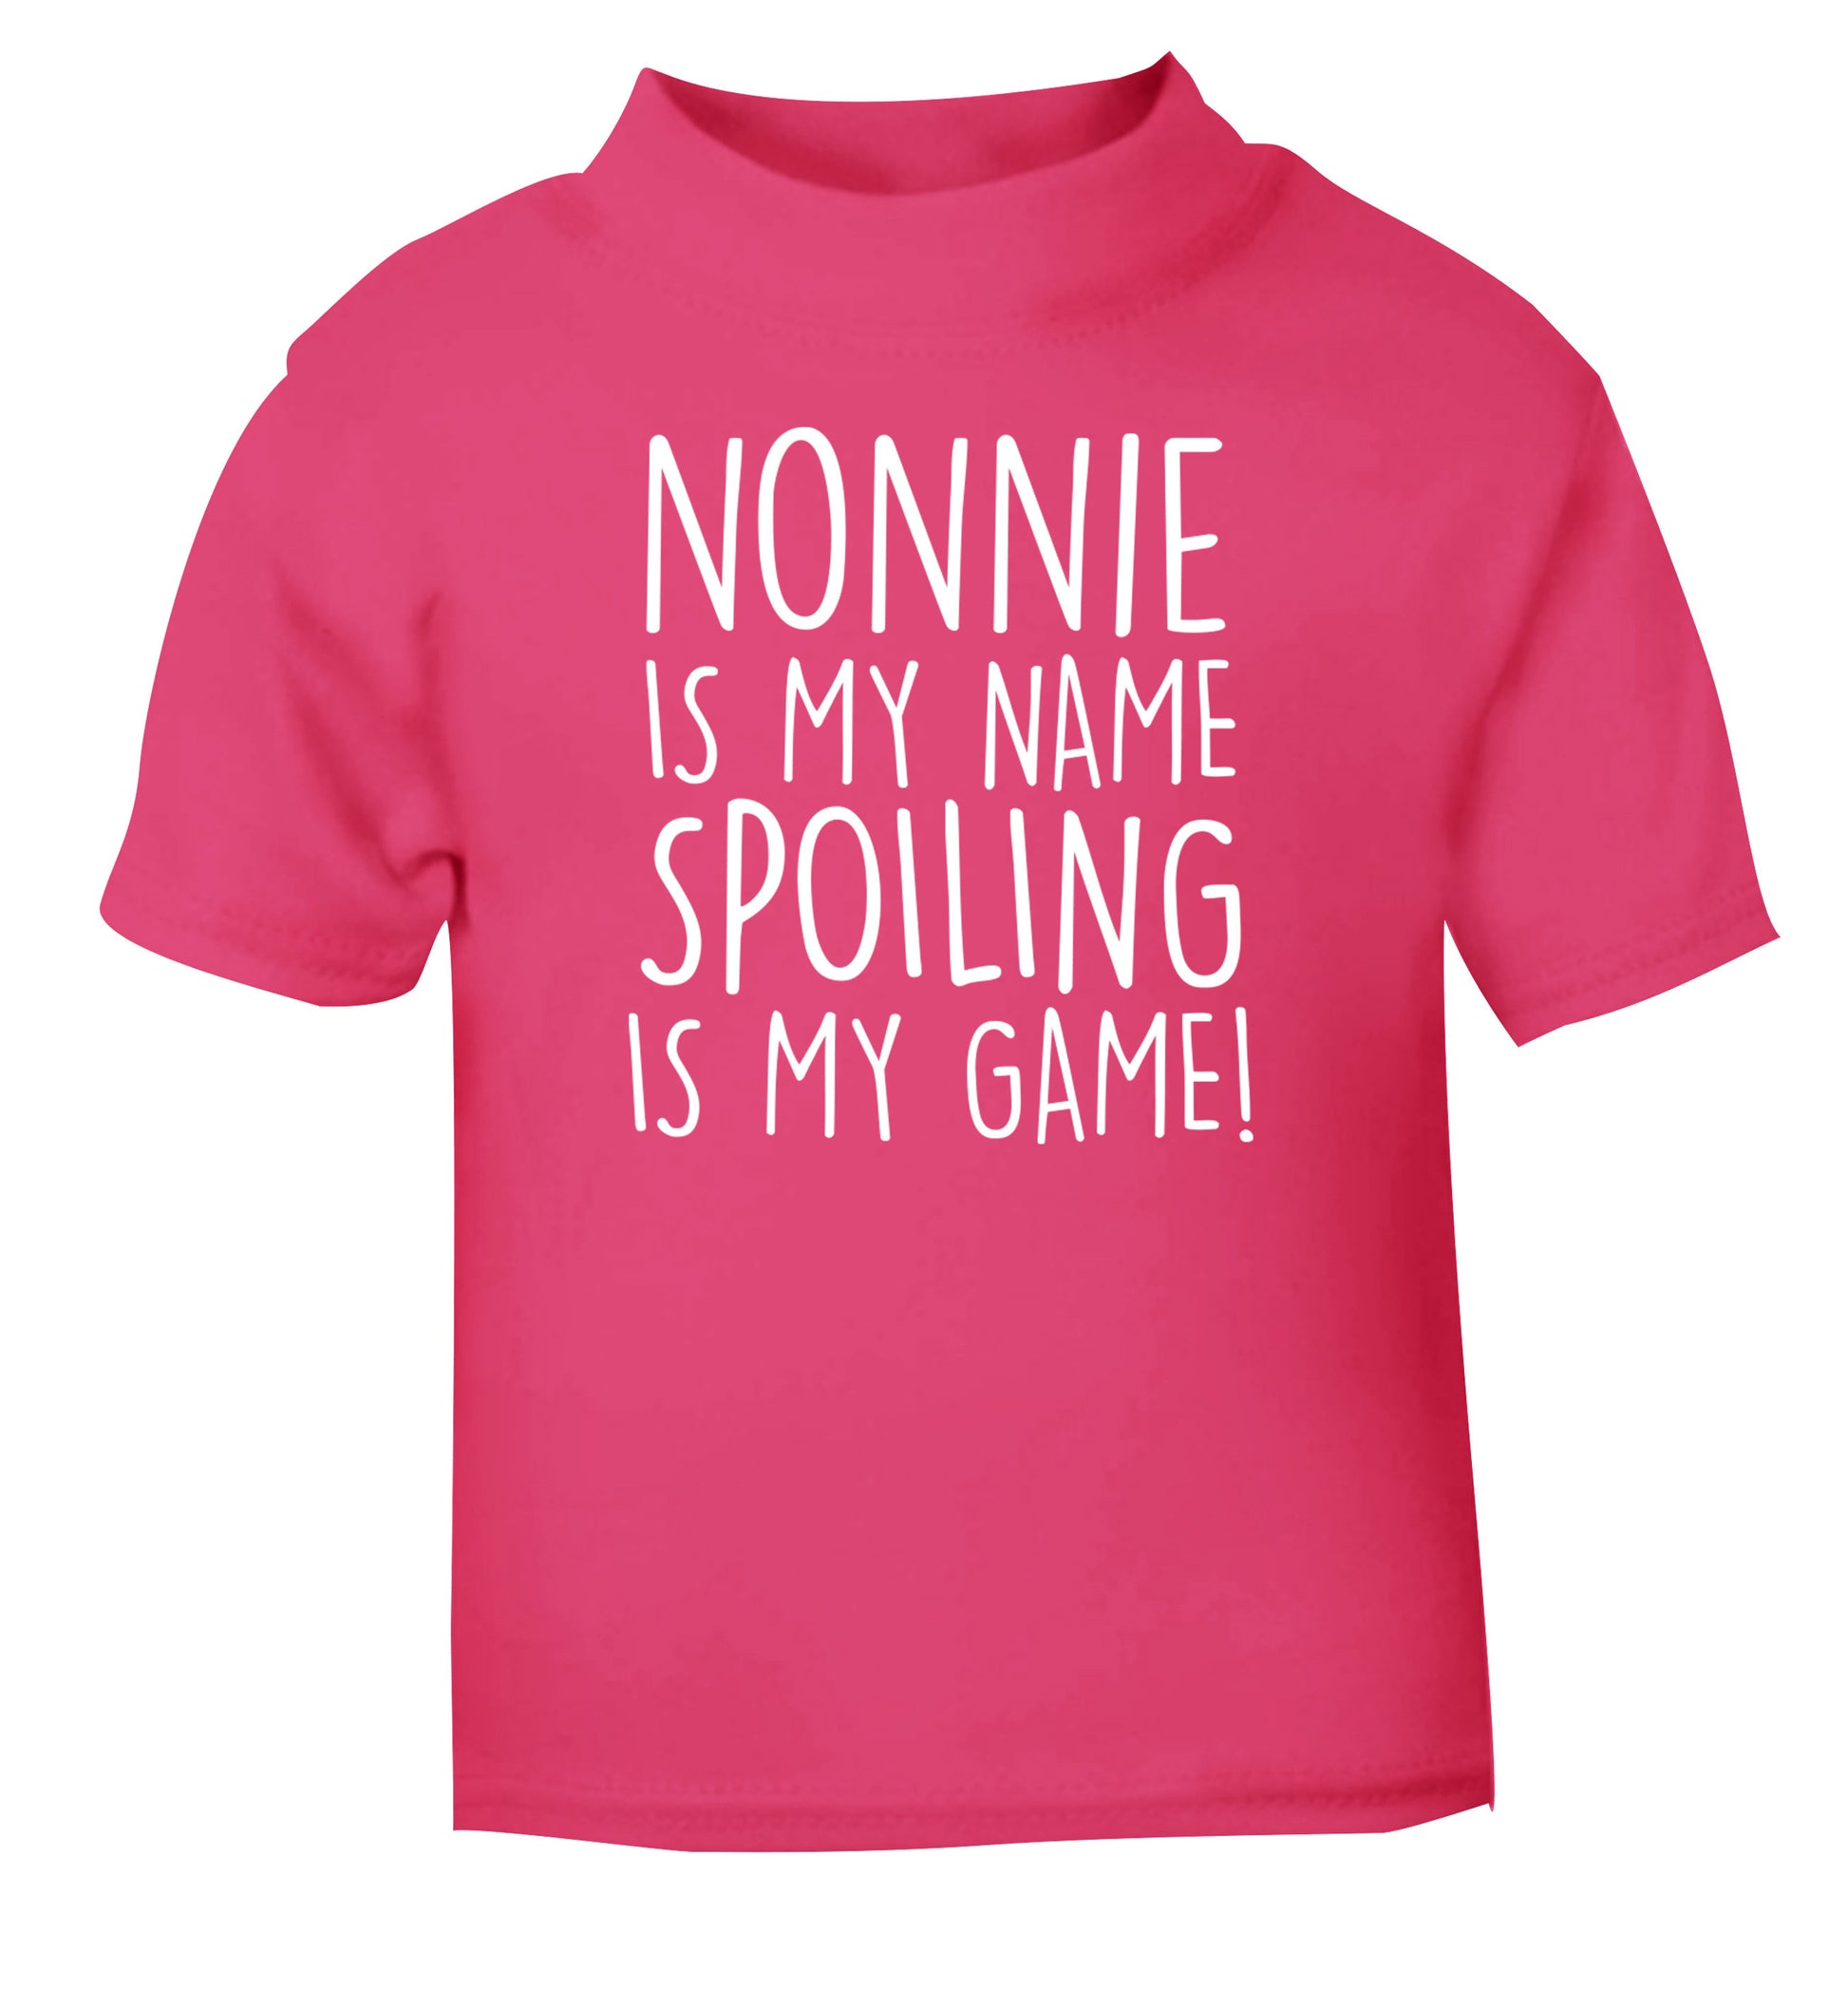 Nonnie is my name, spoiling is my game pink Baby Toddler Tshirt 2 Years